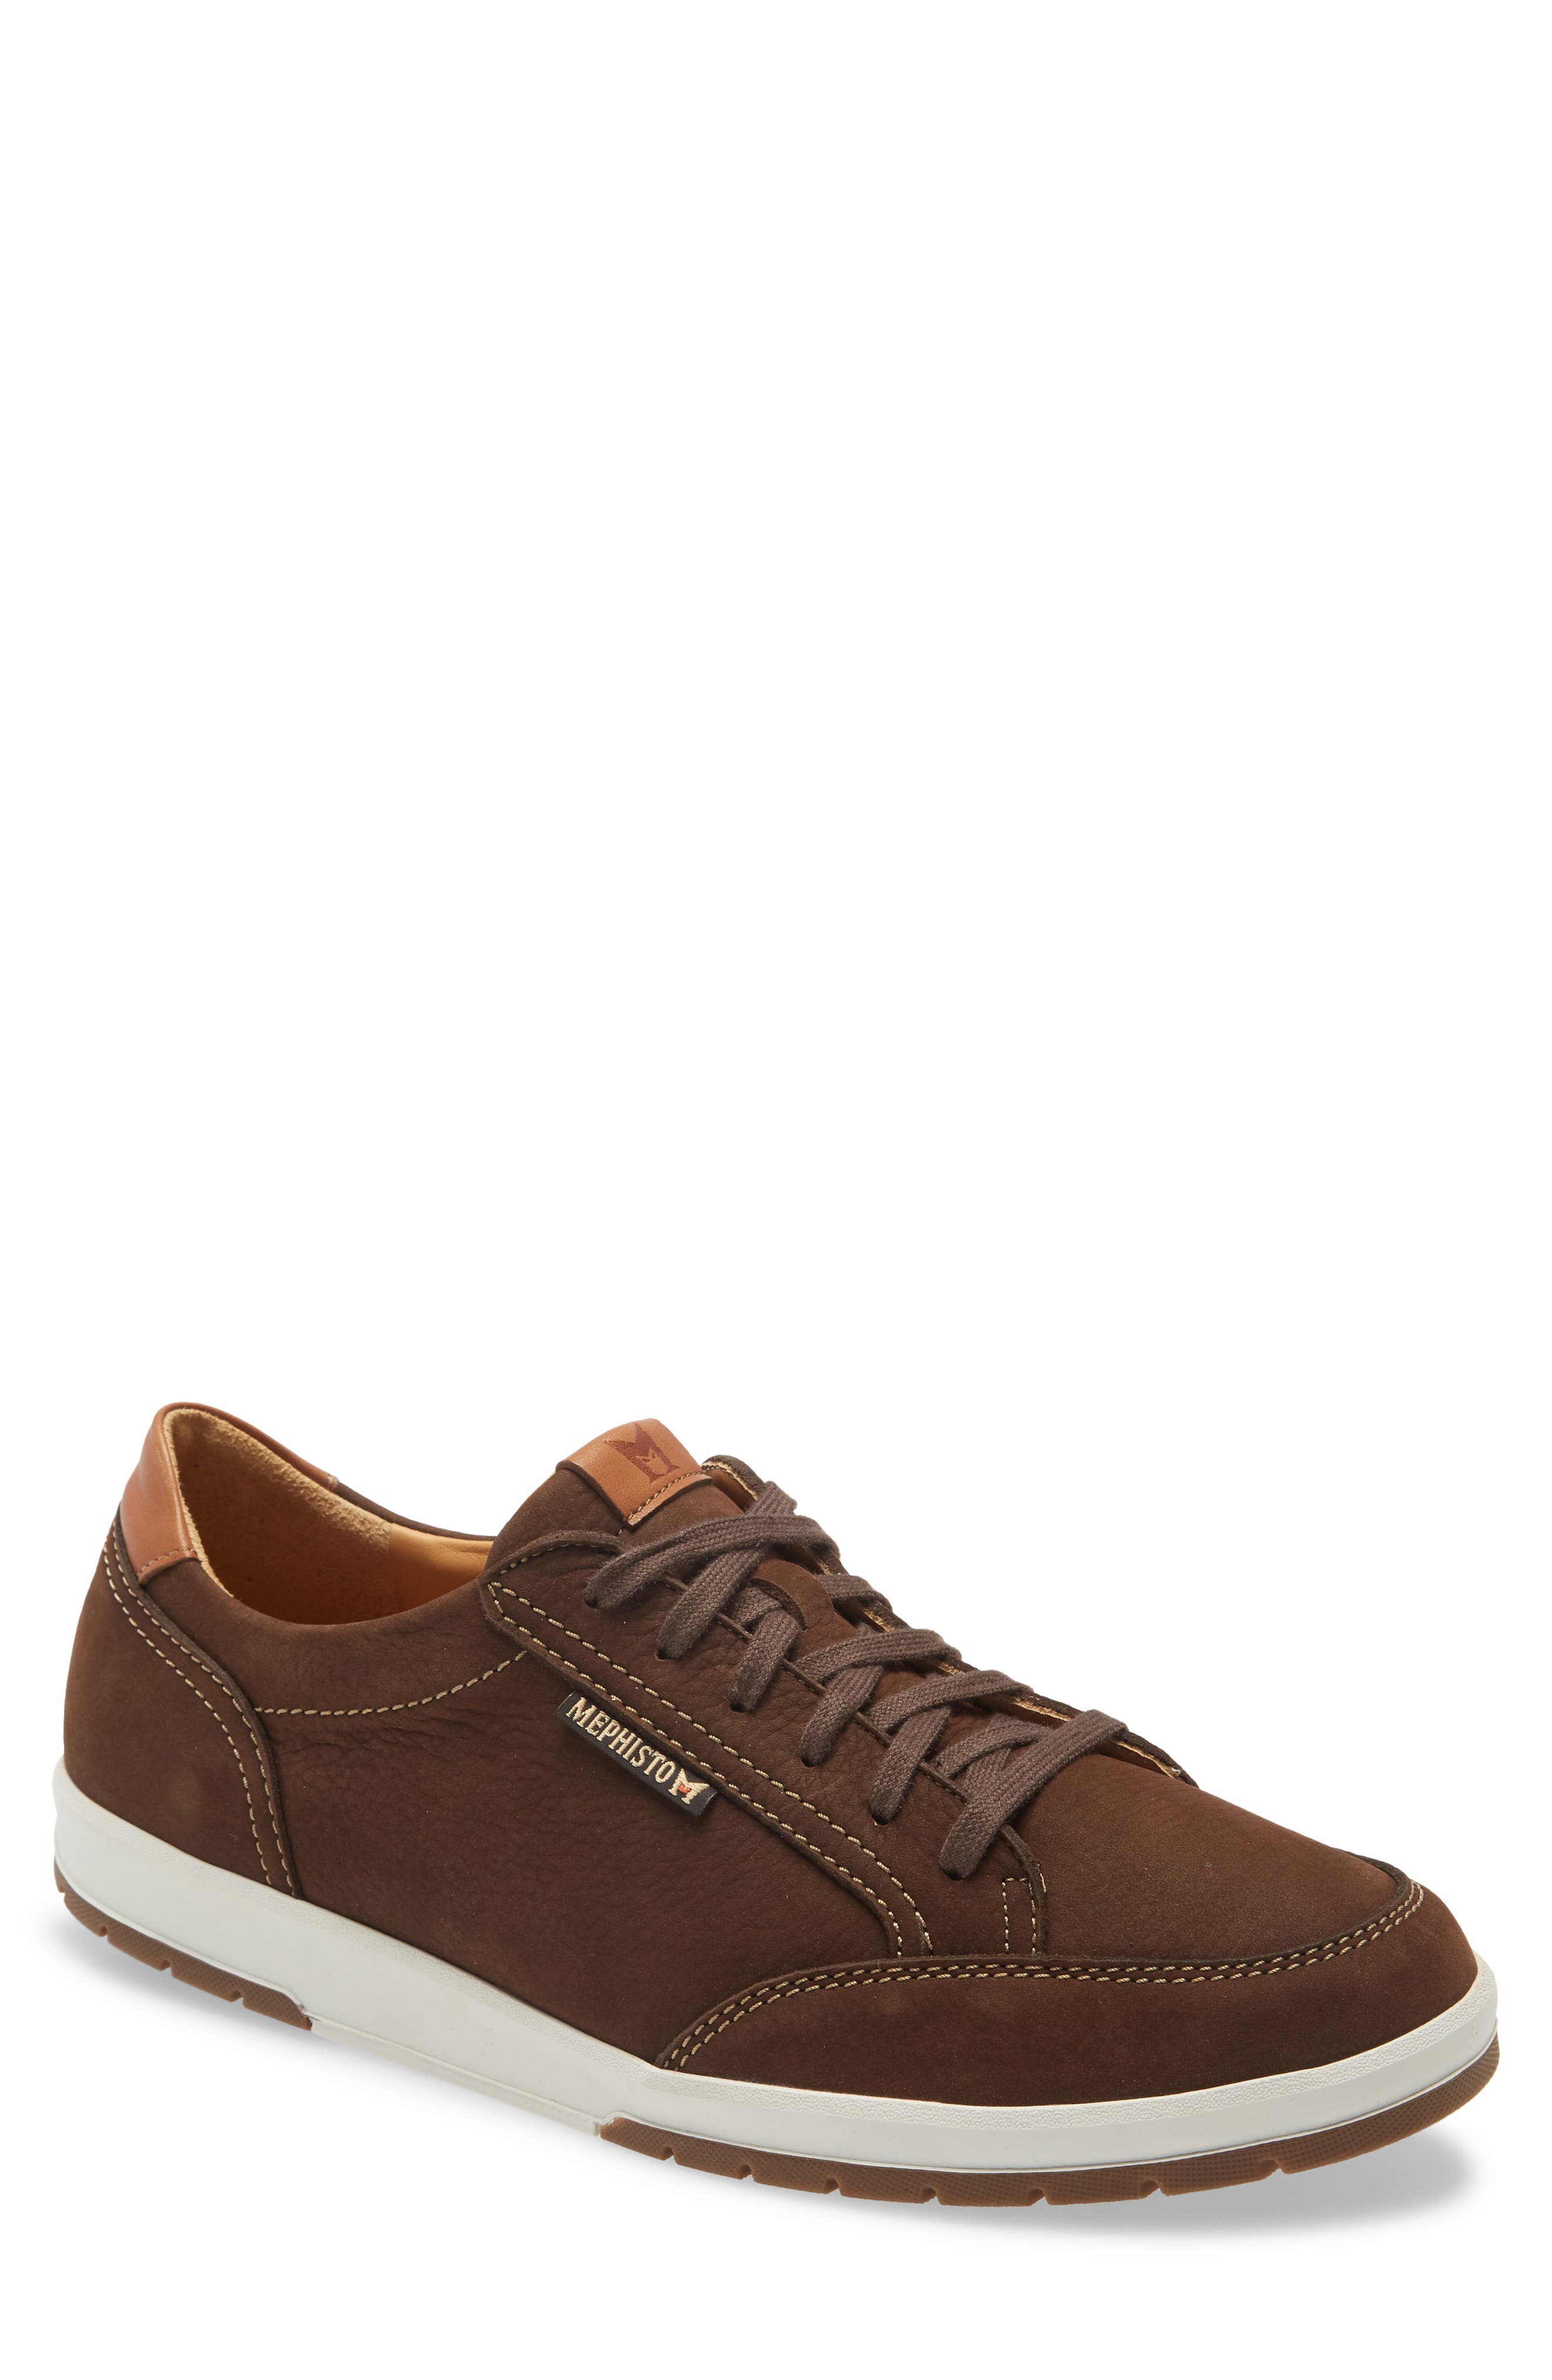 mephisto men's casual shoes